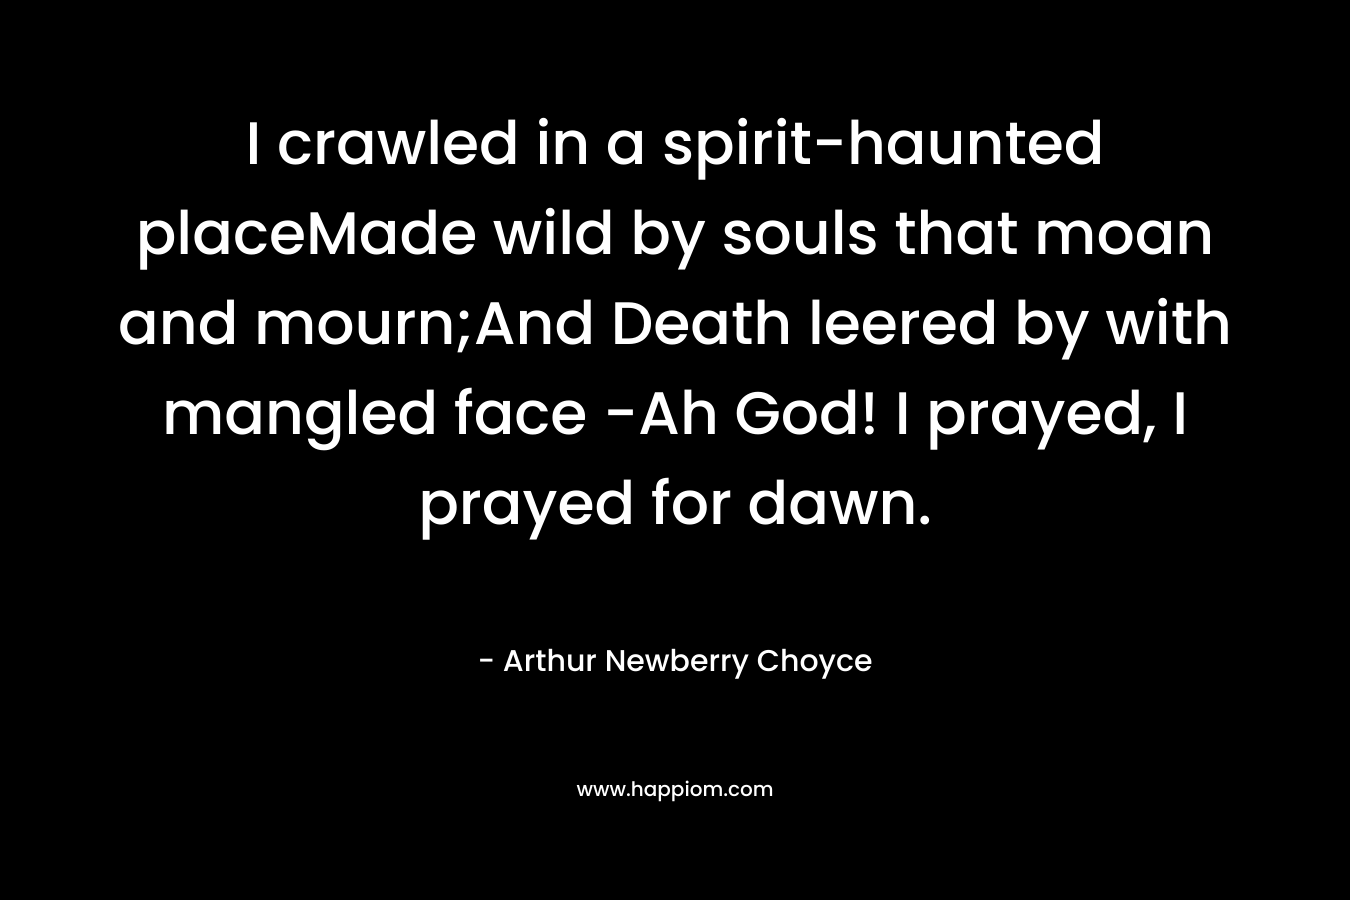 I crawled in a spirit-haunted placeMade wild by souls that moan and mourn;And Death leered by with mangled face -Ah God! I prayed, I prayed for dawn.